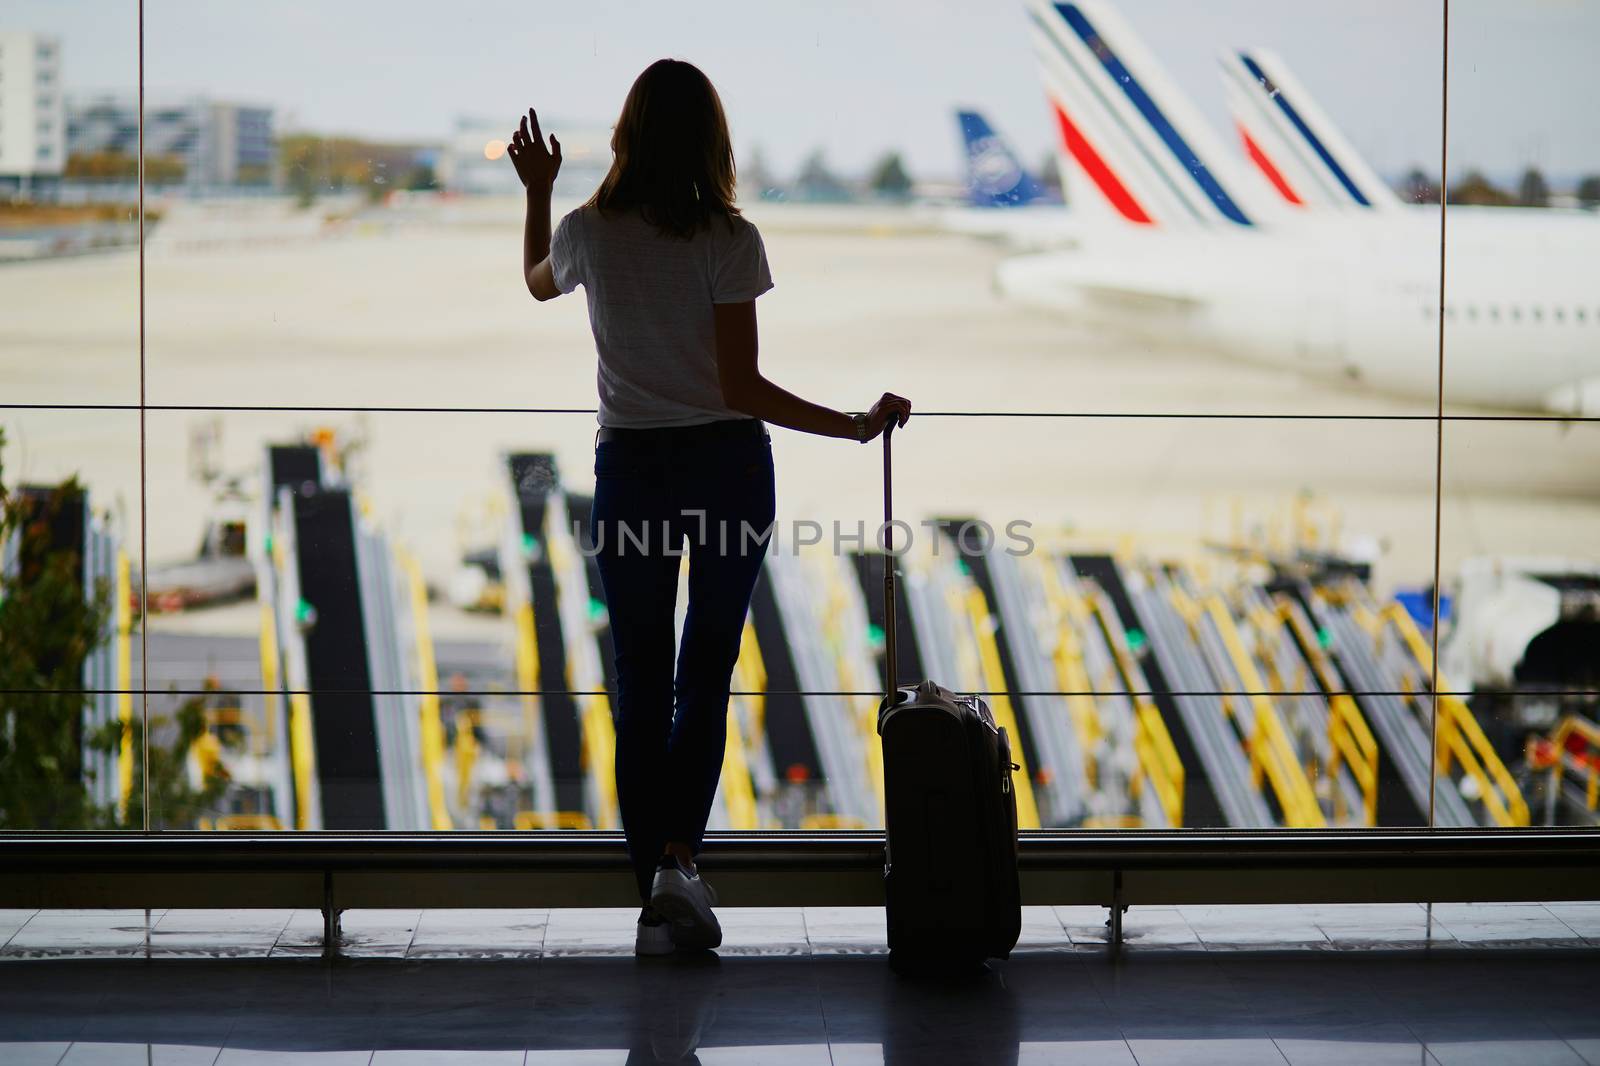 Young woman in international airport, looking through the window at planes